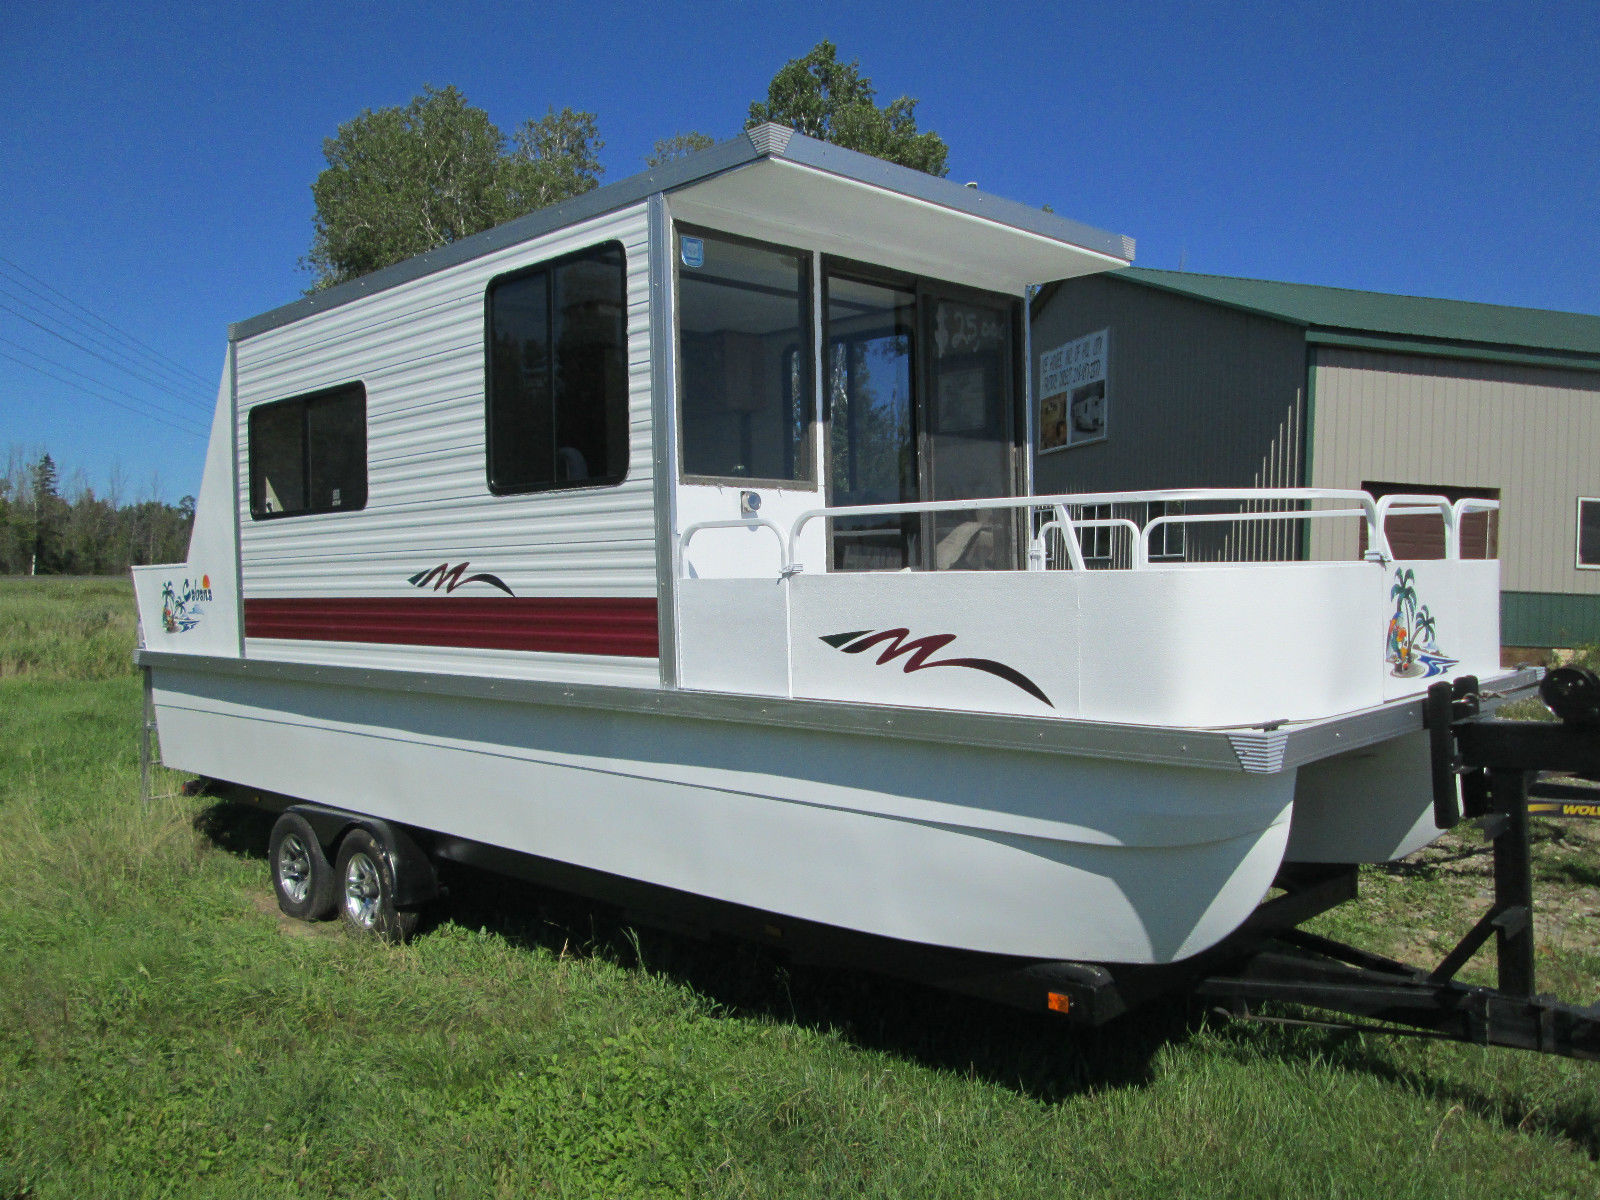 Remodeled 1995 8.5 by 30 lil hobo catarmaran cruiser houseboat including a ...